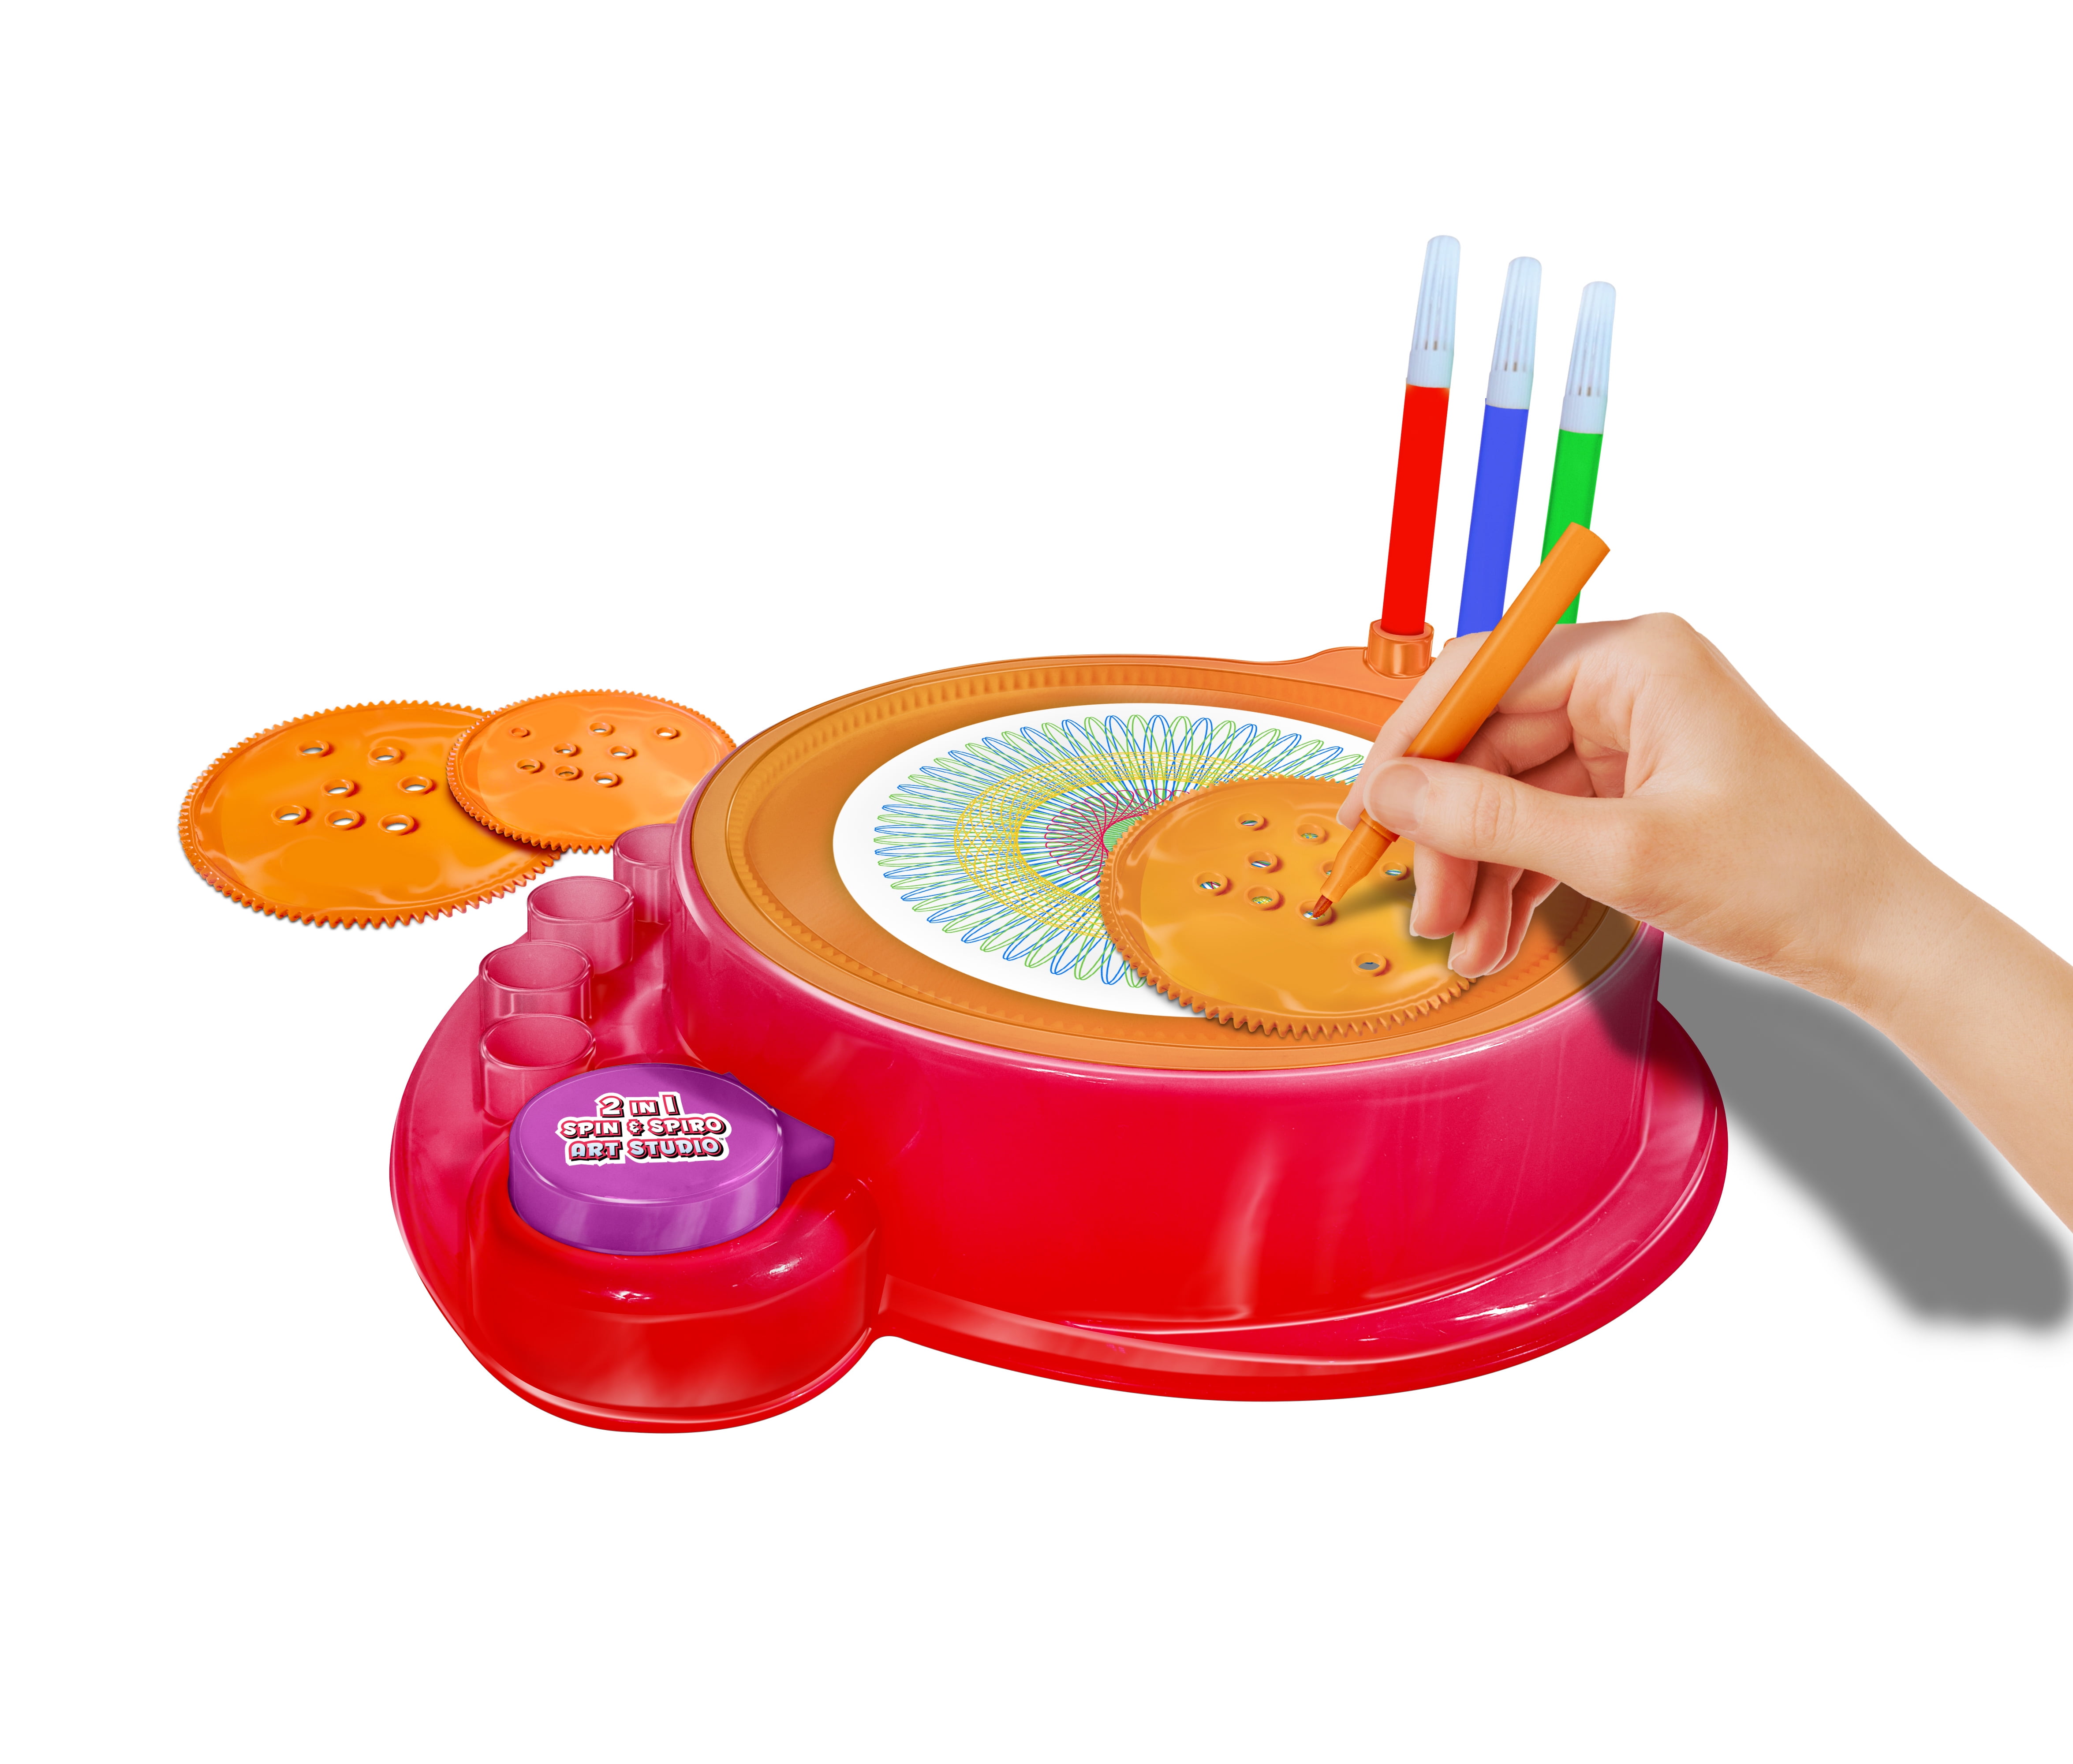 Anker Play 2 in 1 Spin & Spiro Art Studio Set Painting Craft with Spin Art Machi 